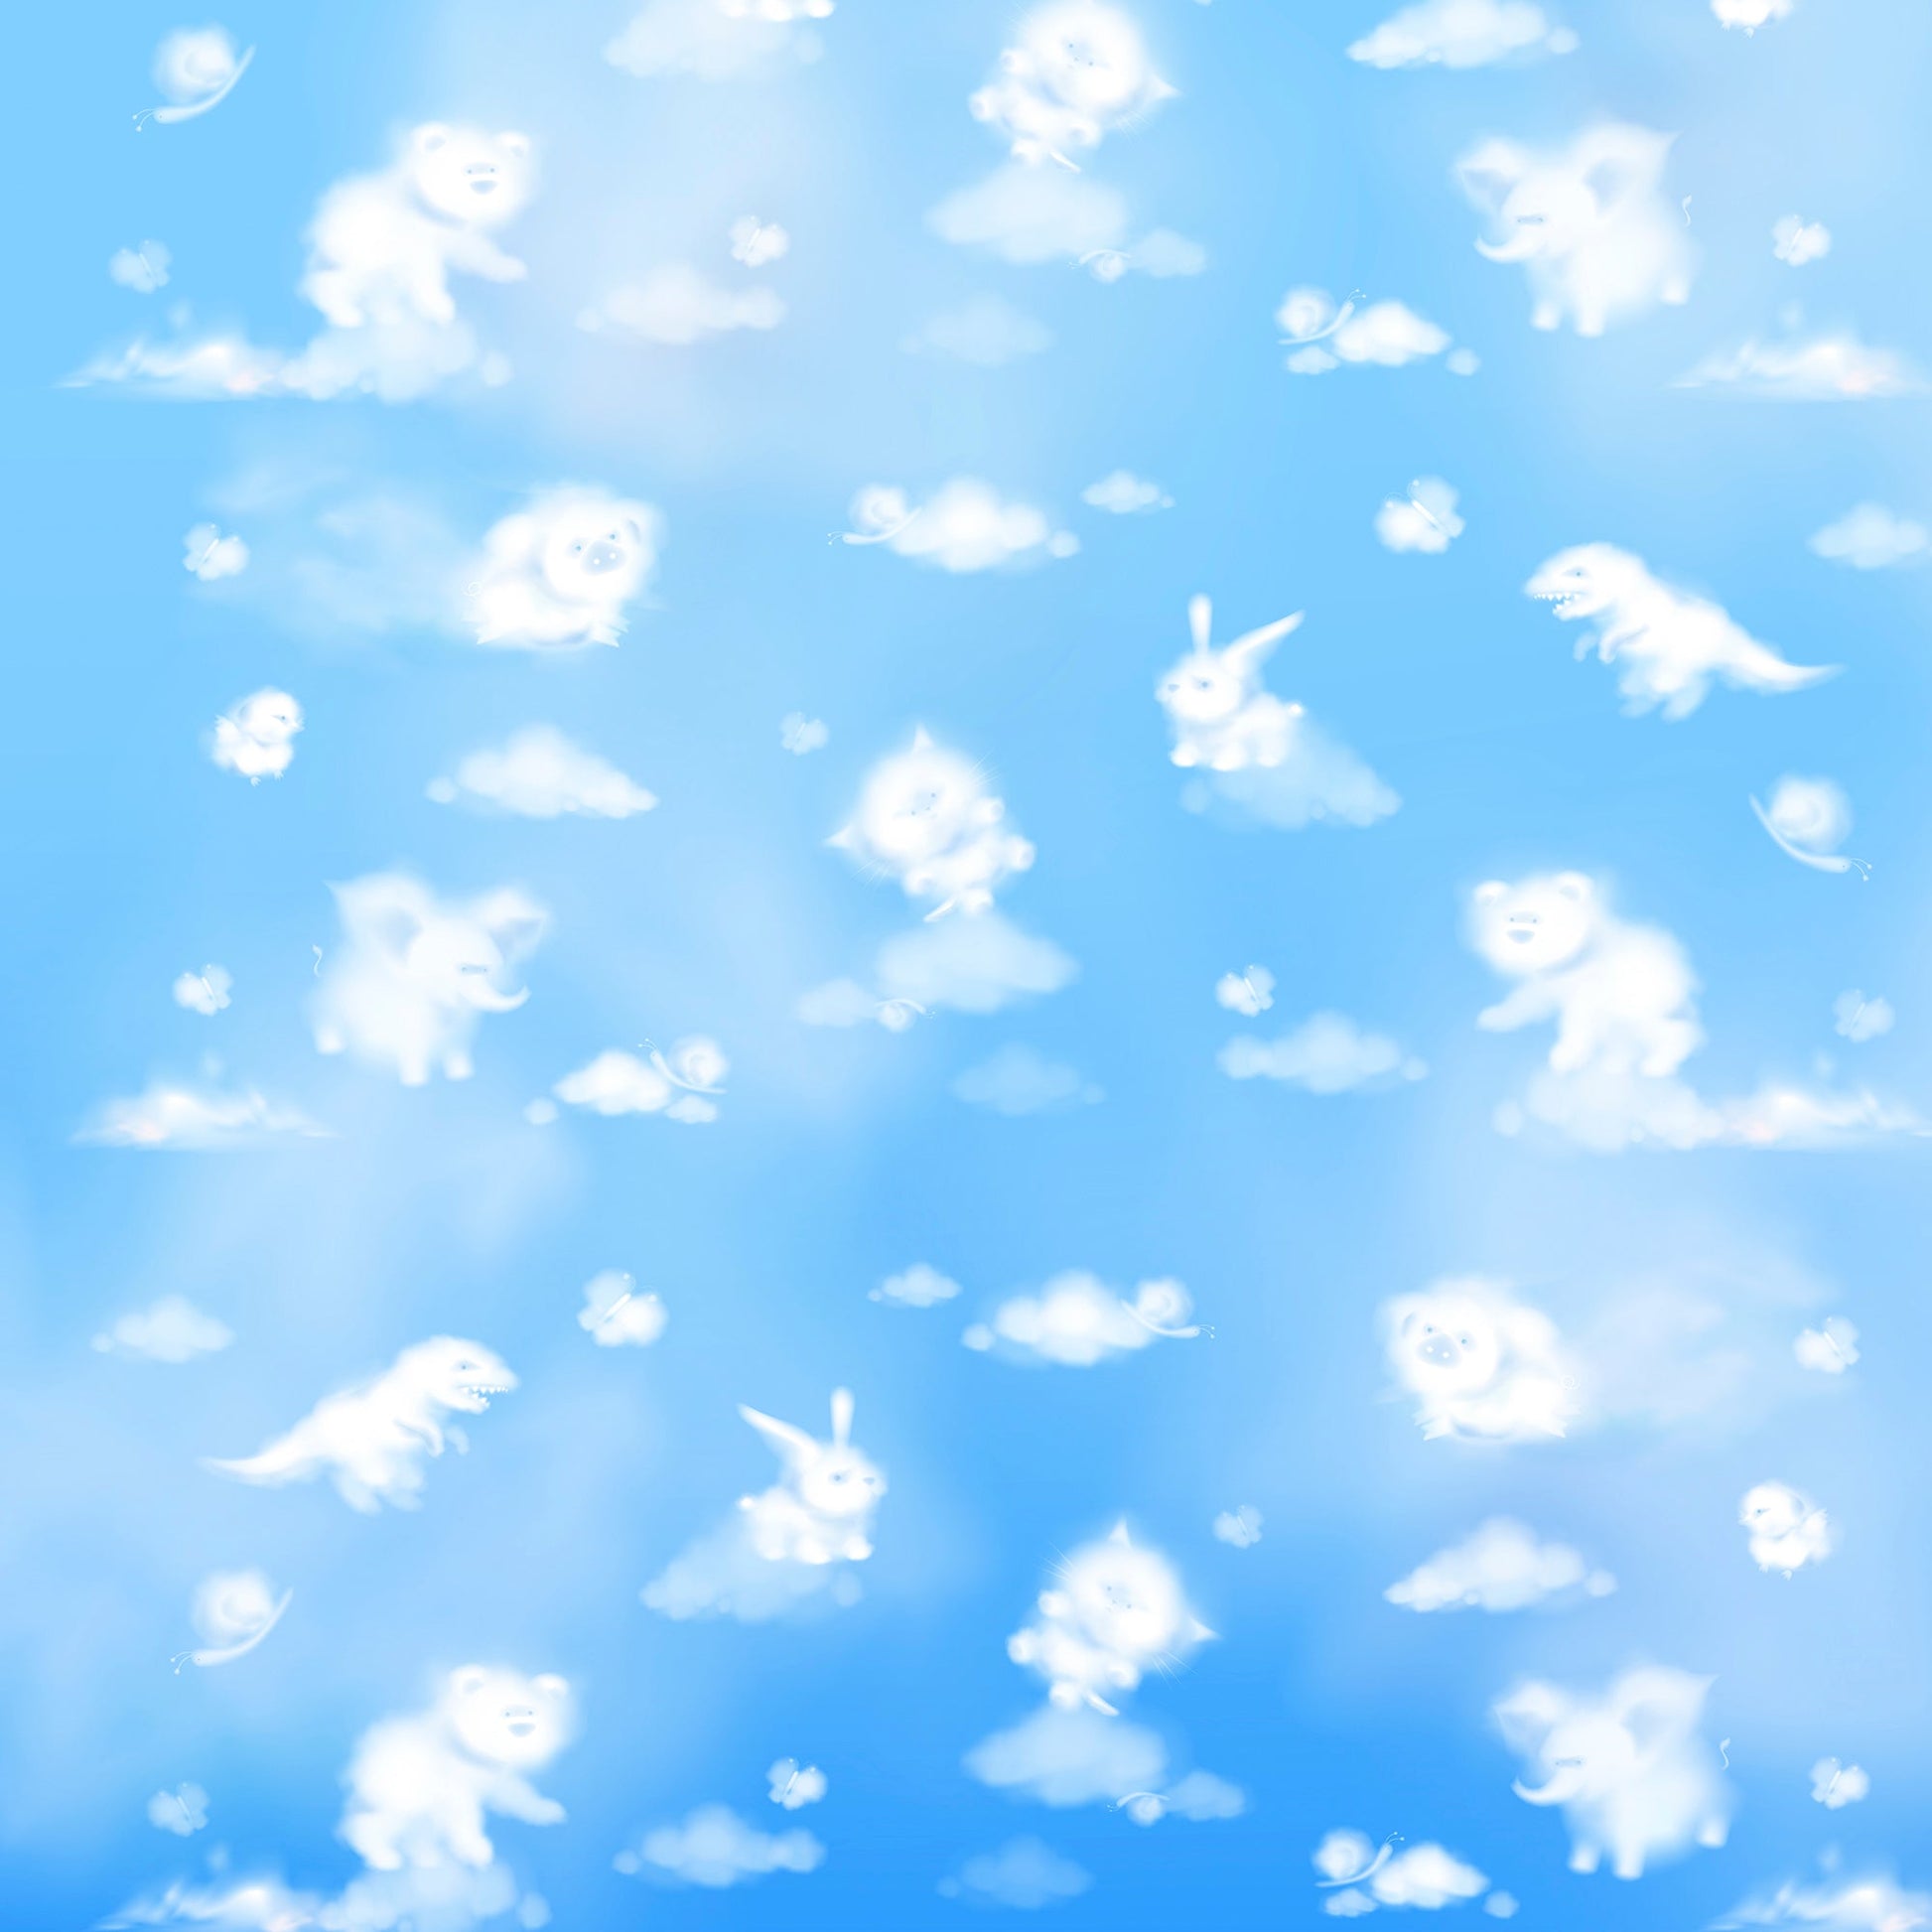 Blue Sky and clouds with animal shapes - OCP TINY THINGS